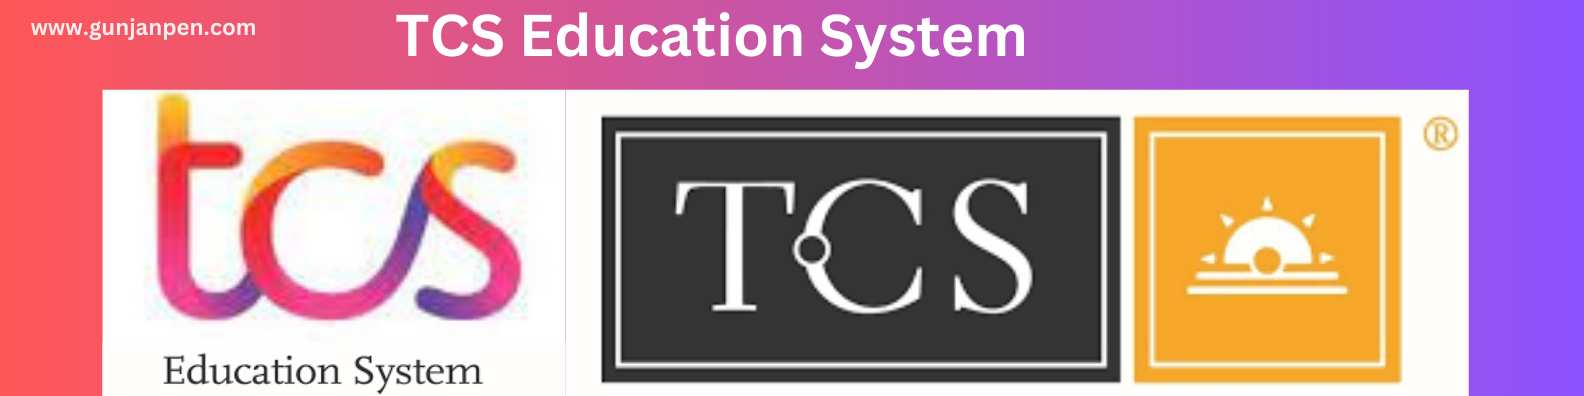 TCS Education System: Shaping Futures Through Innovative Education